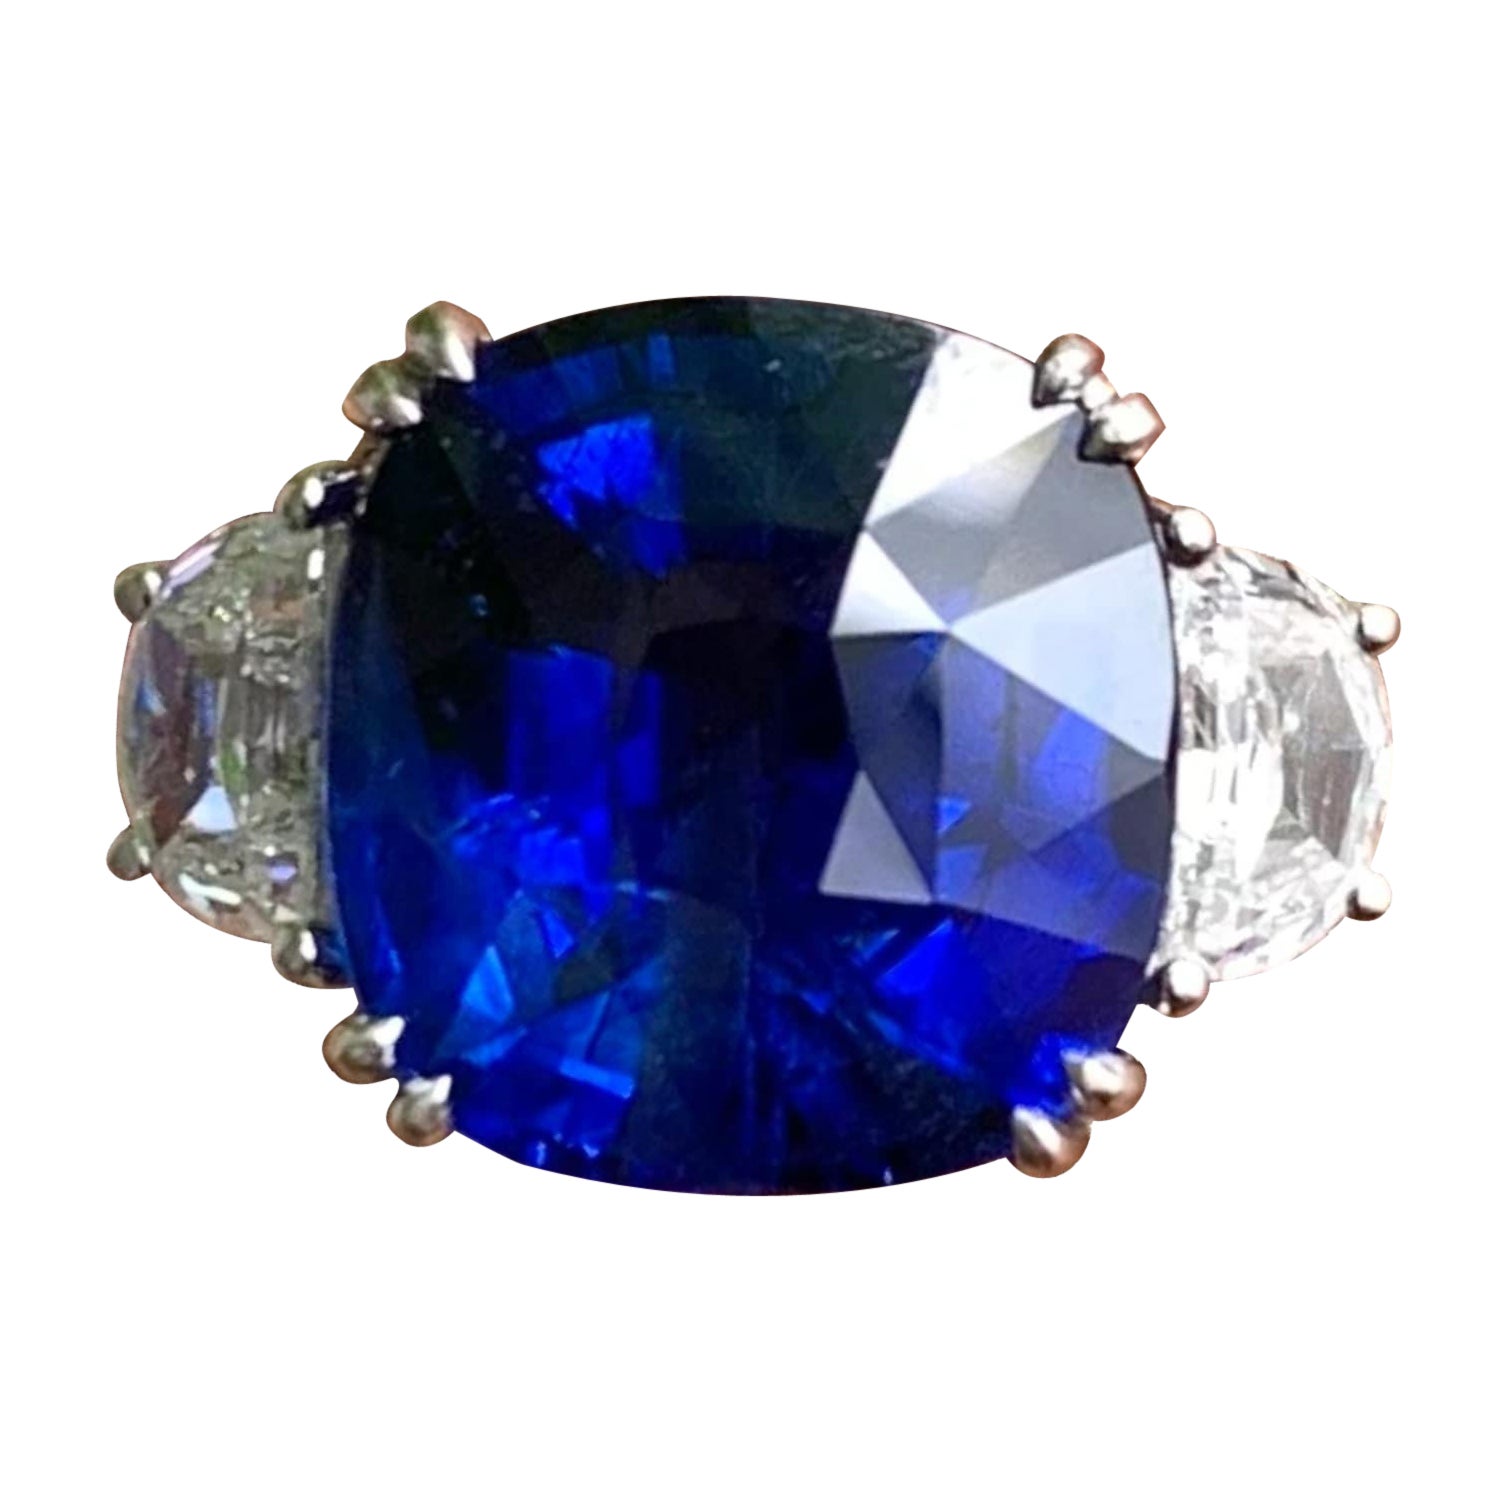 Magnificent 13.48 Carat Blue Sapphire Three Stone Ring in 18K White Gold